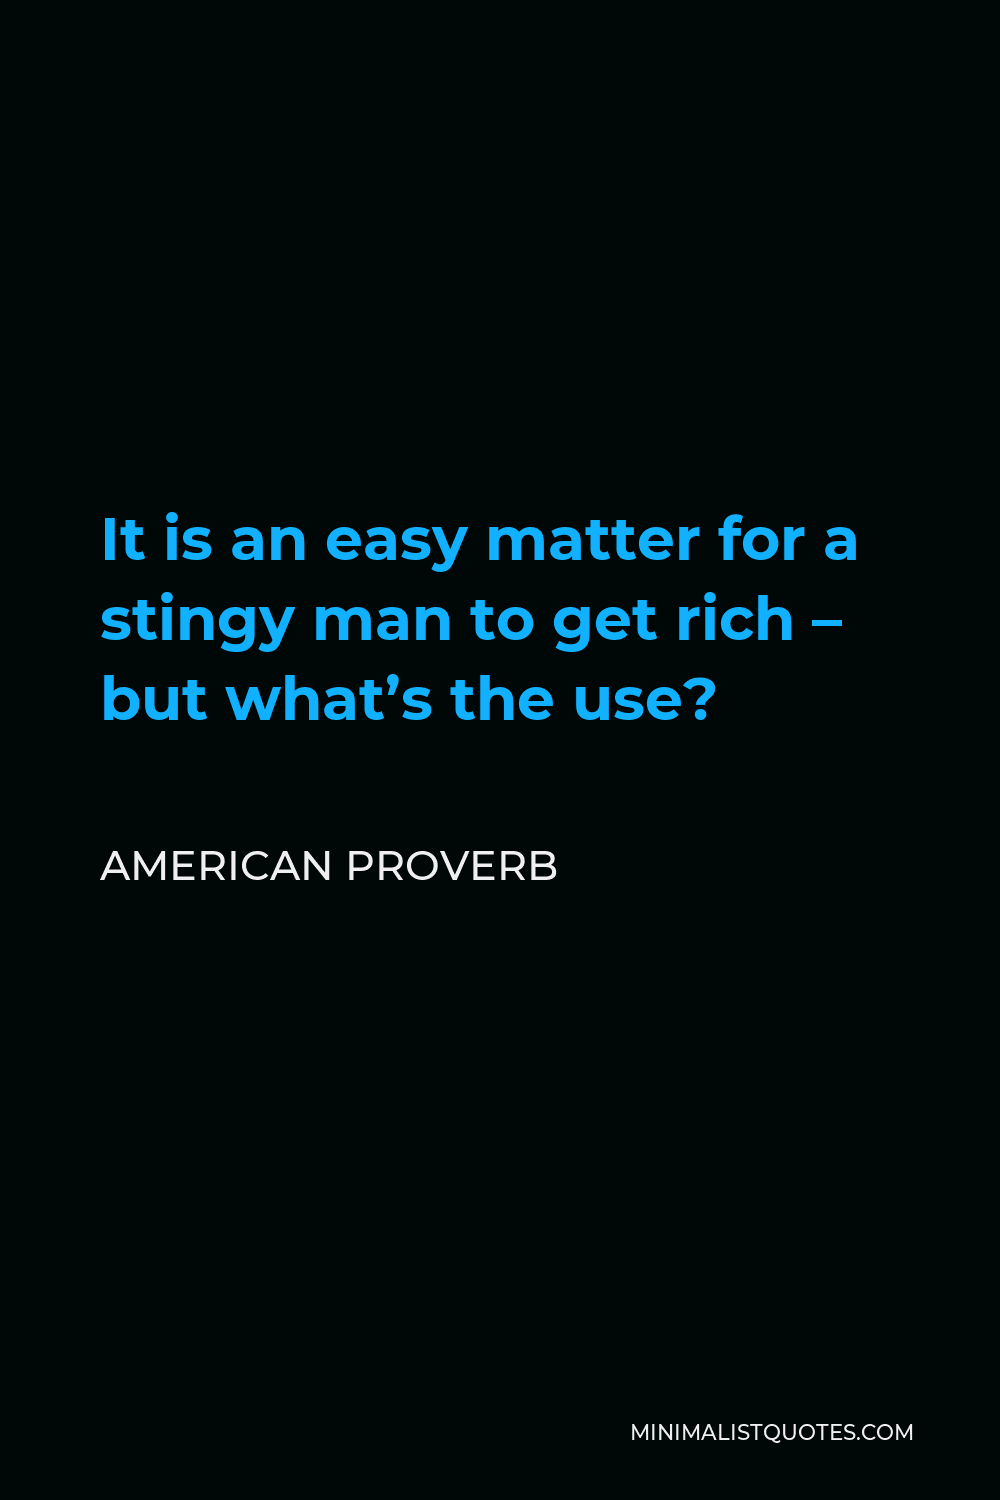 American Proverb Quote - It is an easy matter for a stingy man to get rich – but what’s the use?